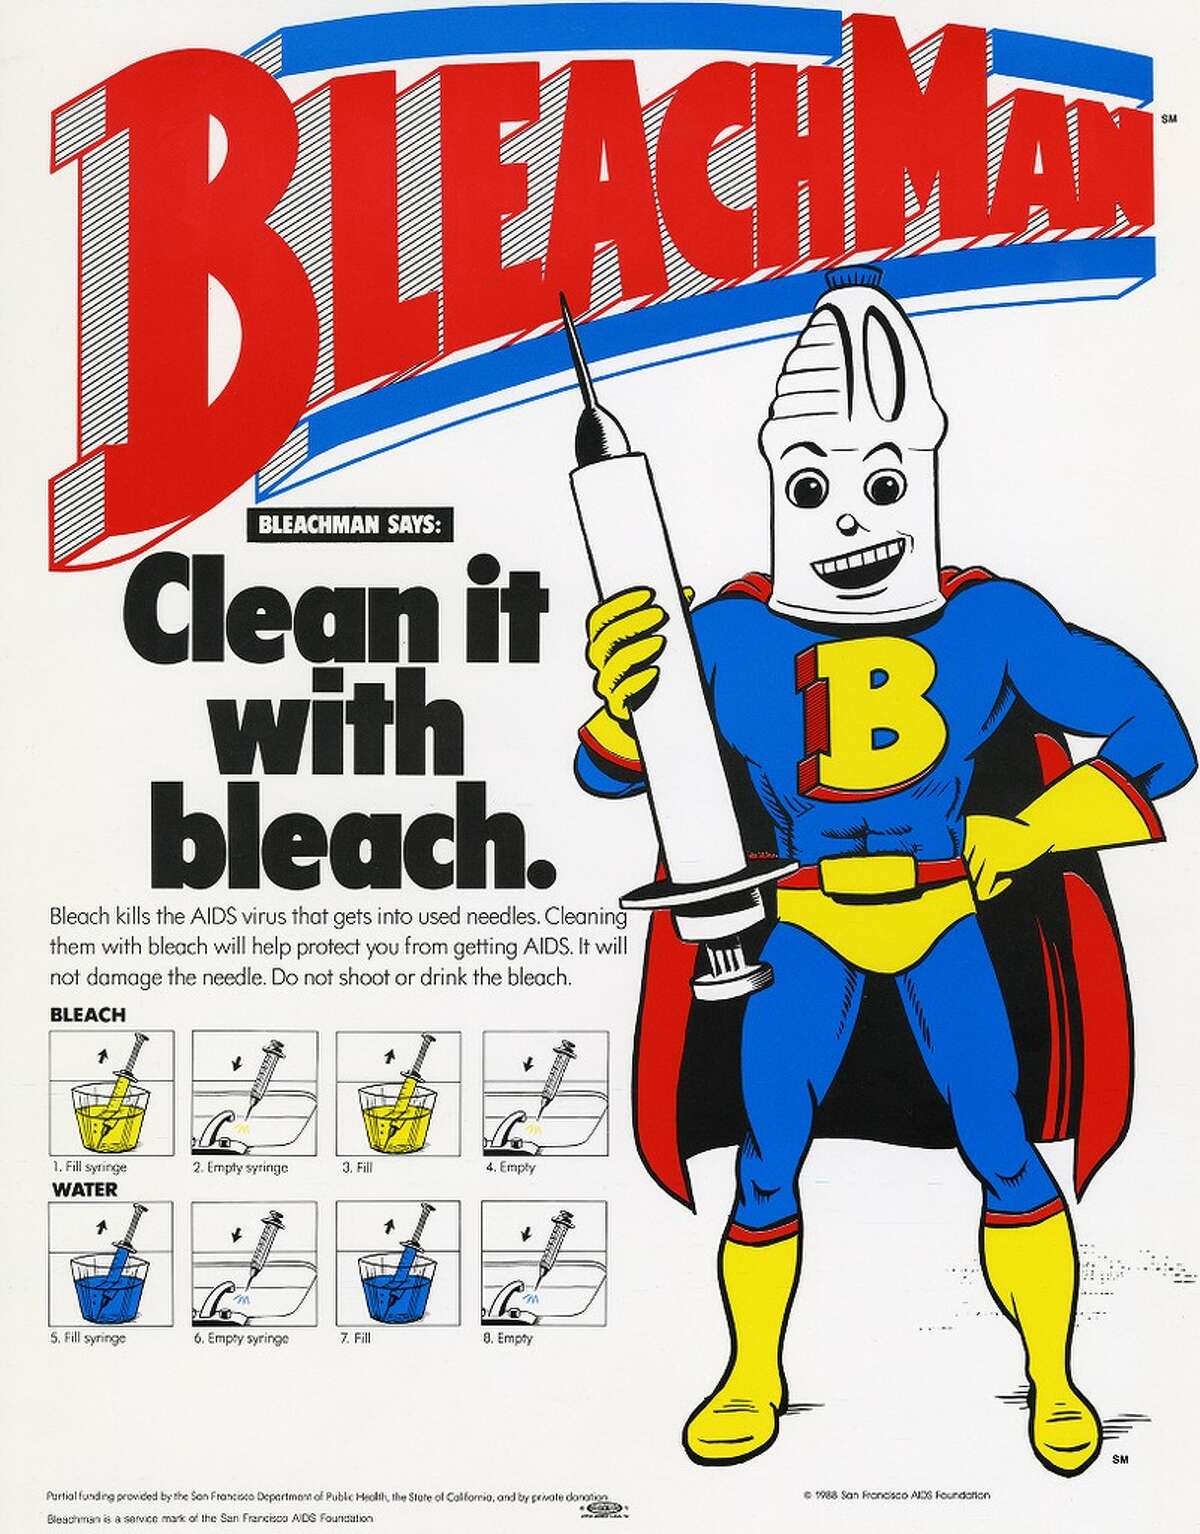 Tracking down 'Bleachman,' San Francisco's AIDS-fighting hero of 1980s ads